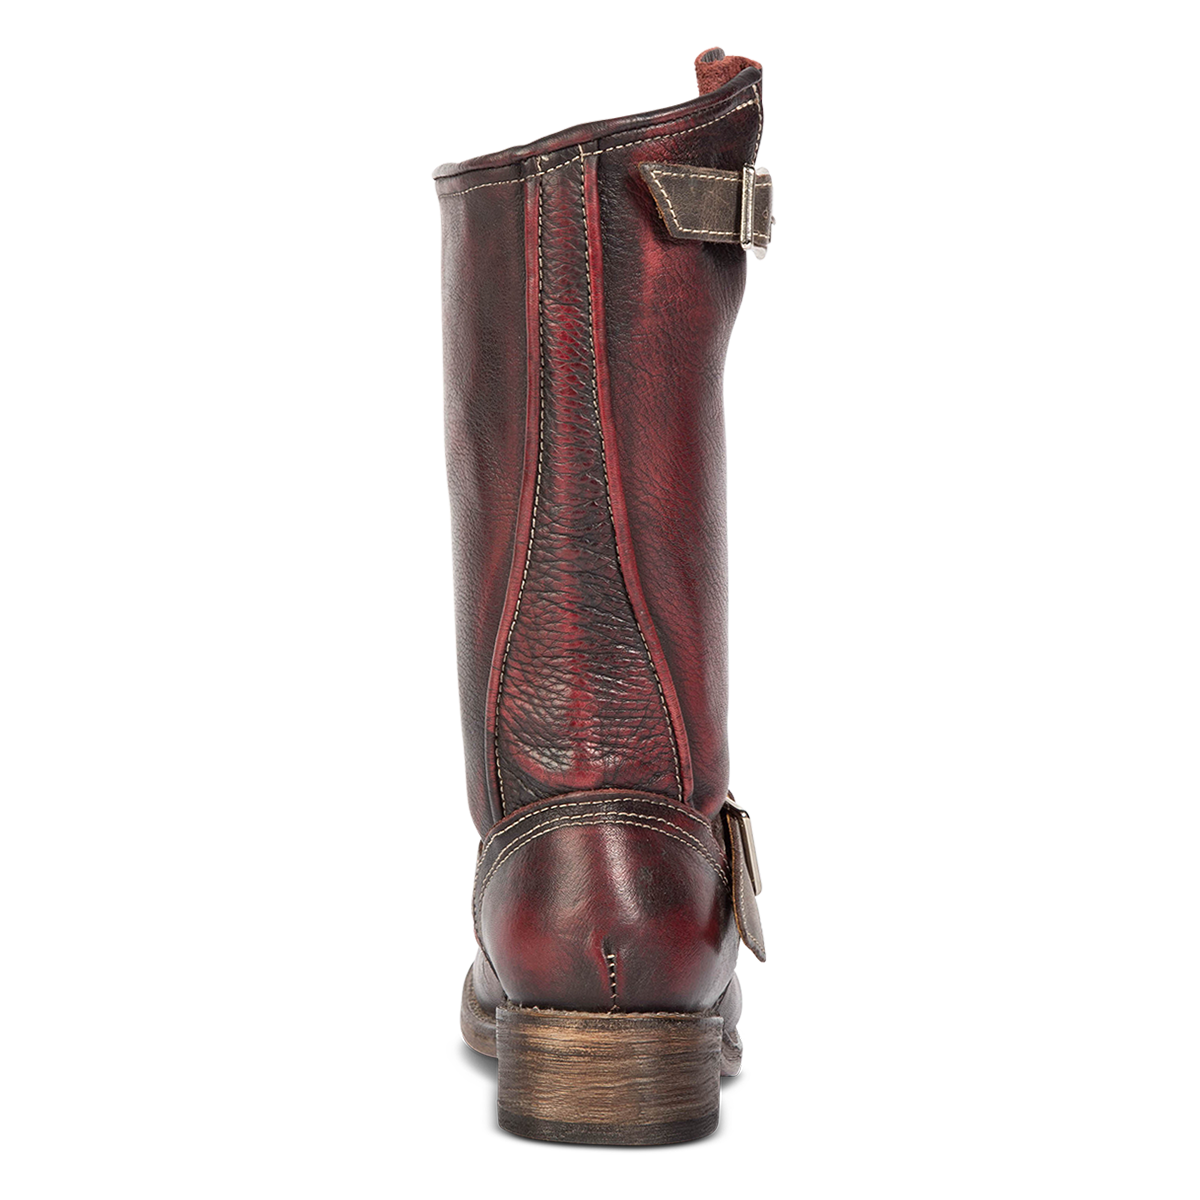 Back view showing full grain leather and raised leather seams on FREEBIRD women's Crosby wine leather boot